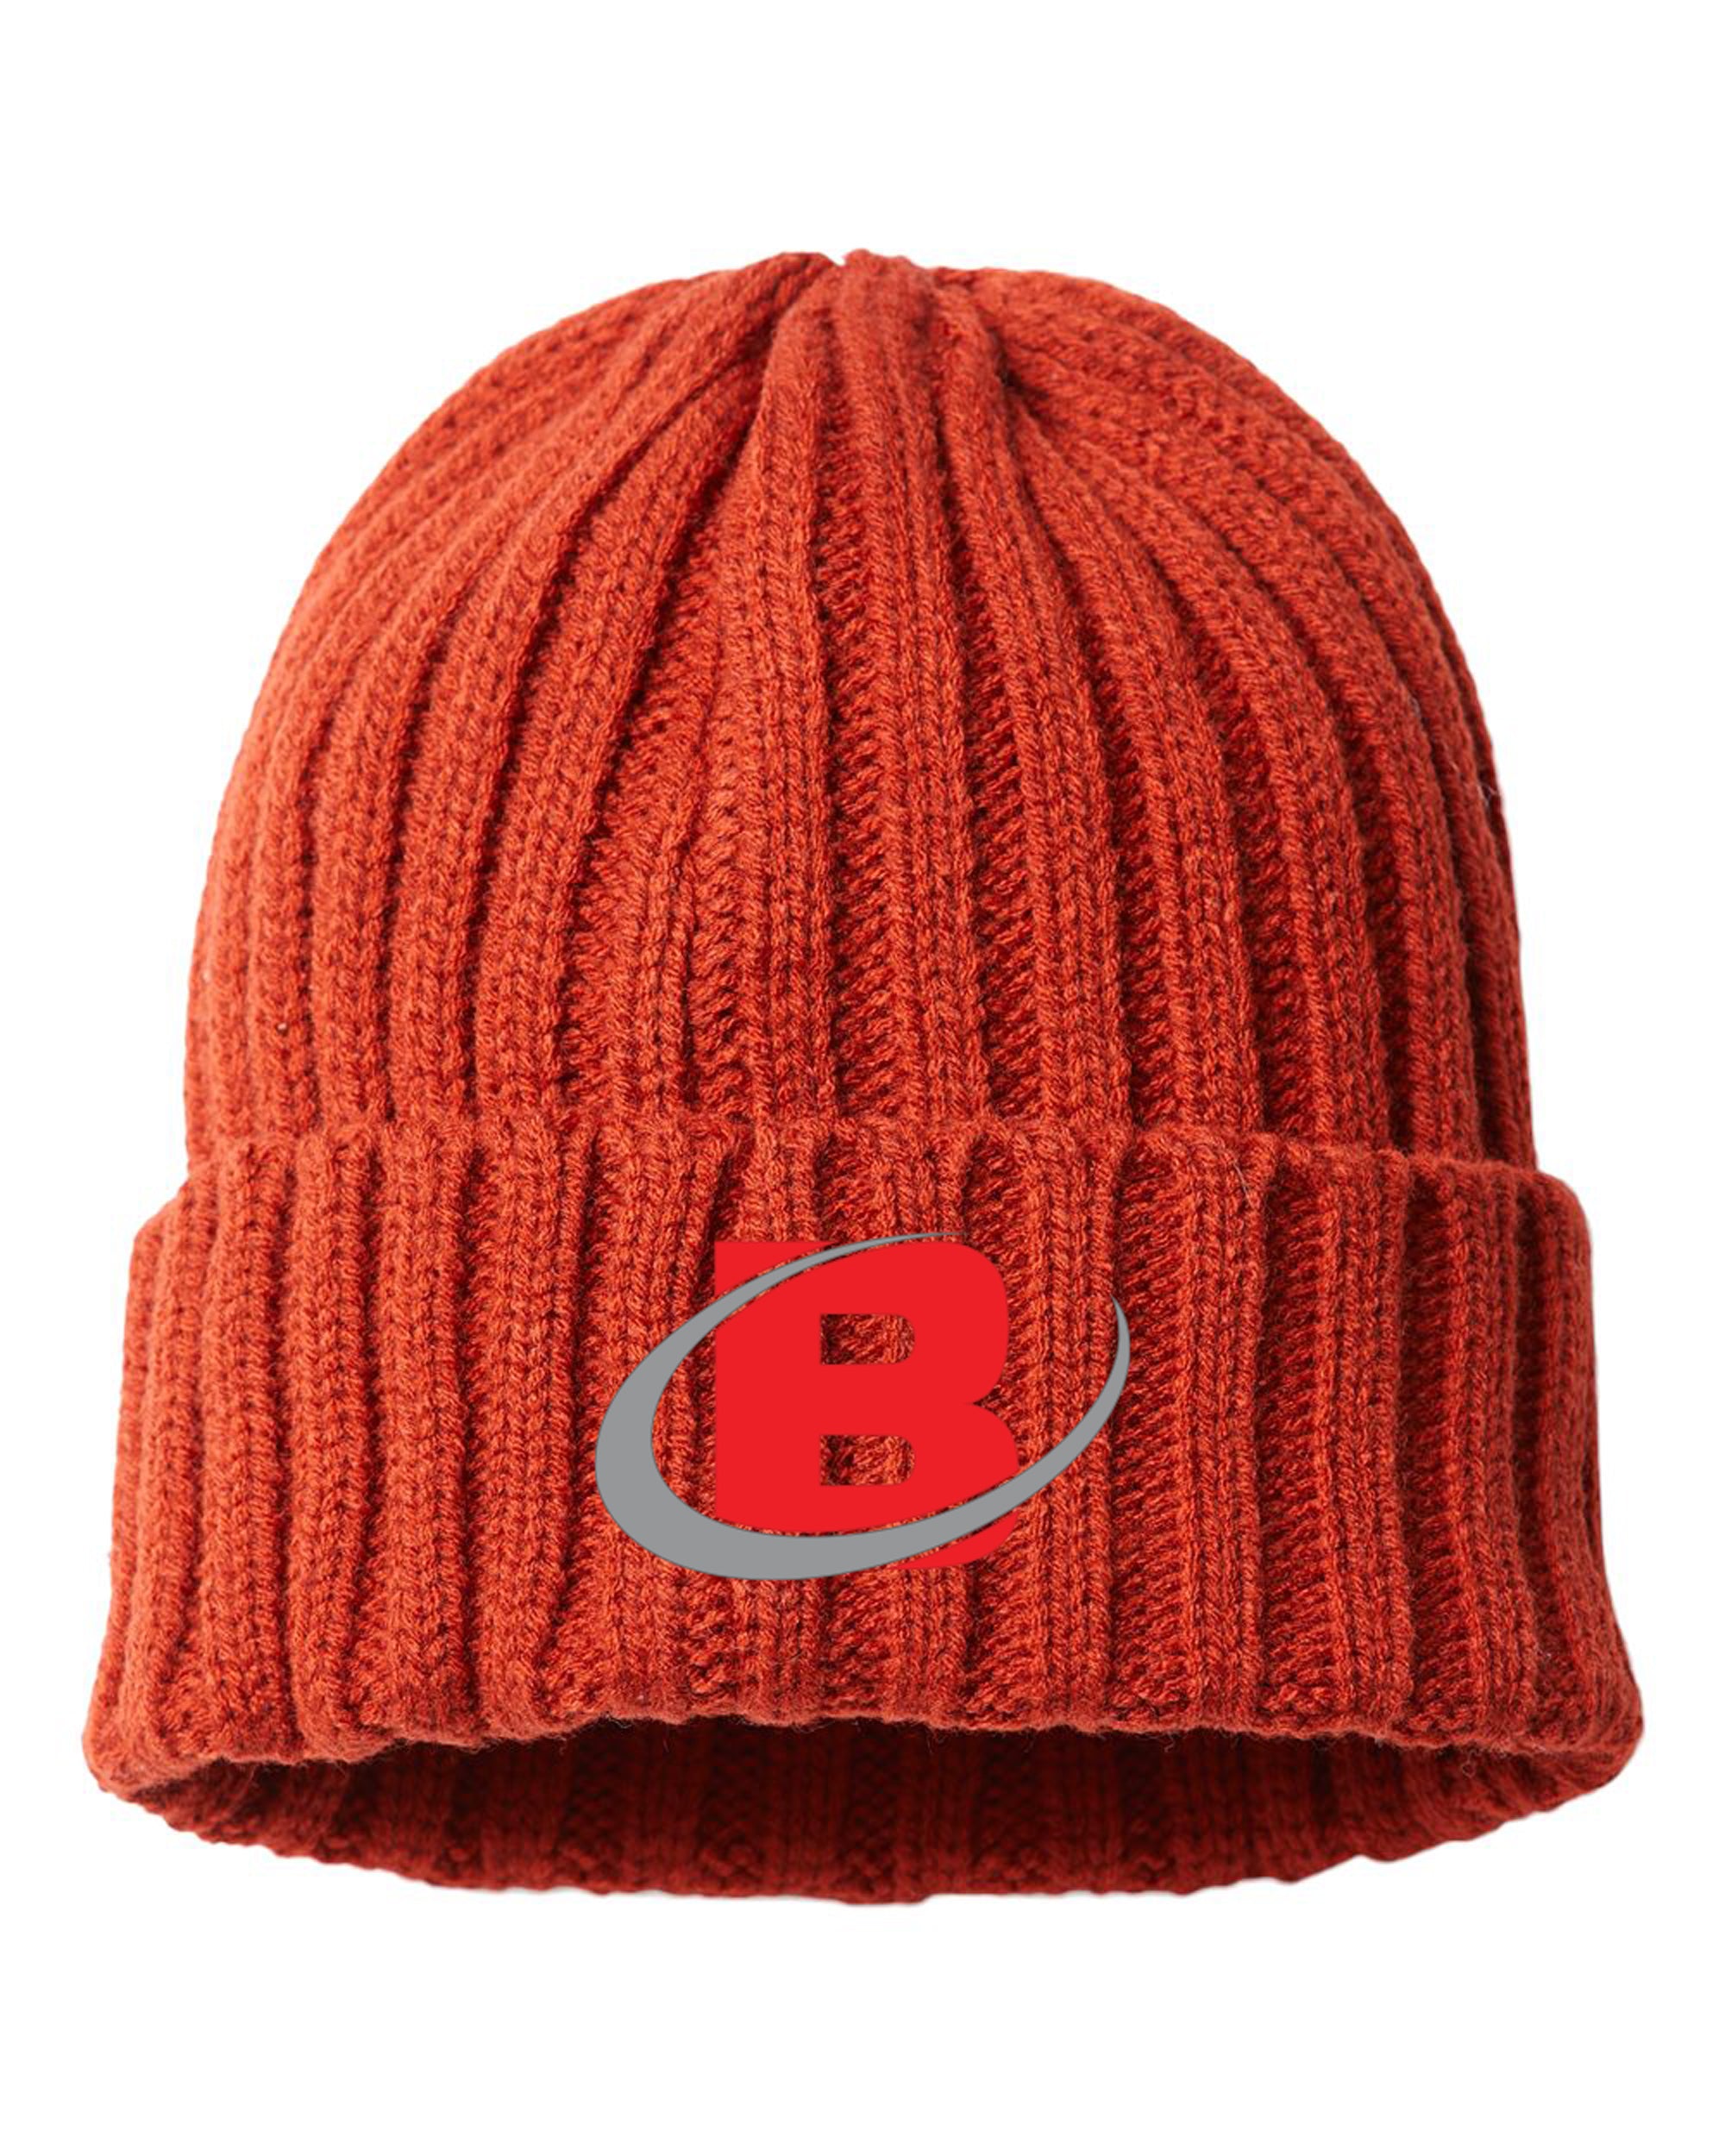 Bowman Excavating - Cable Knit Beanie